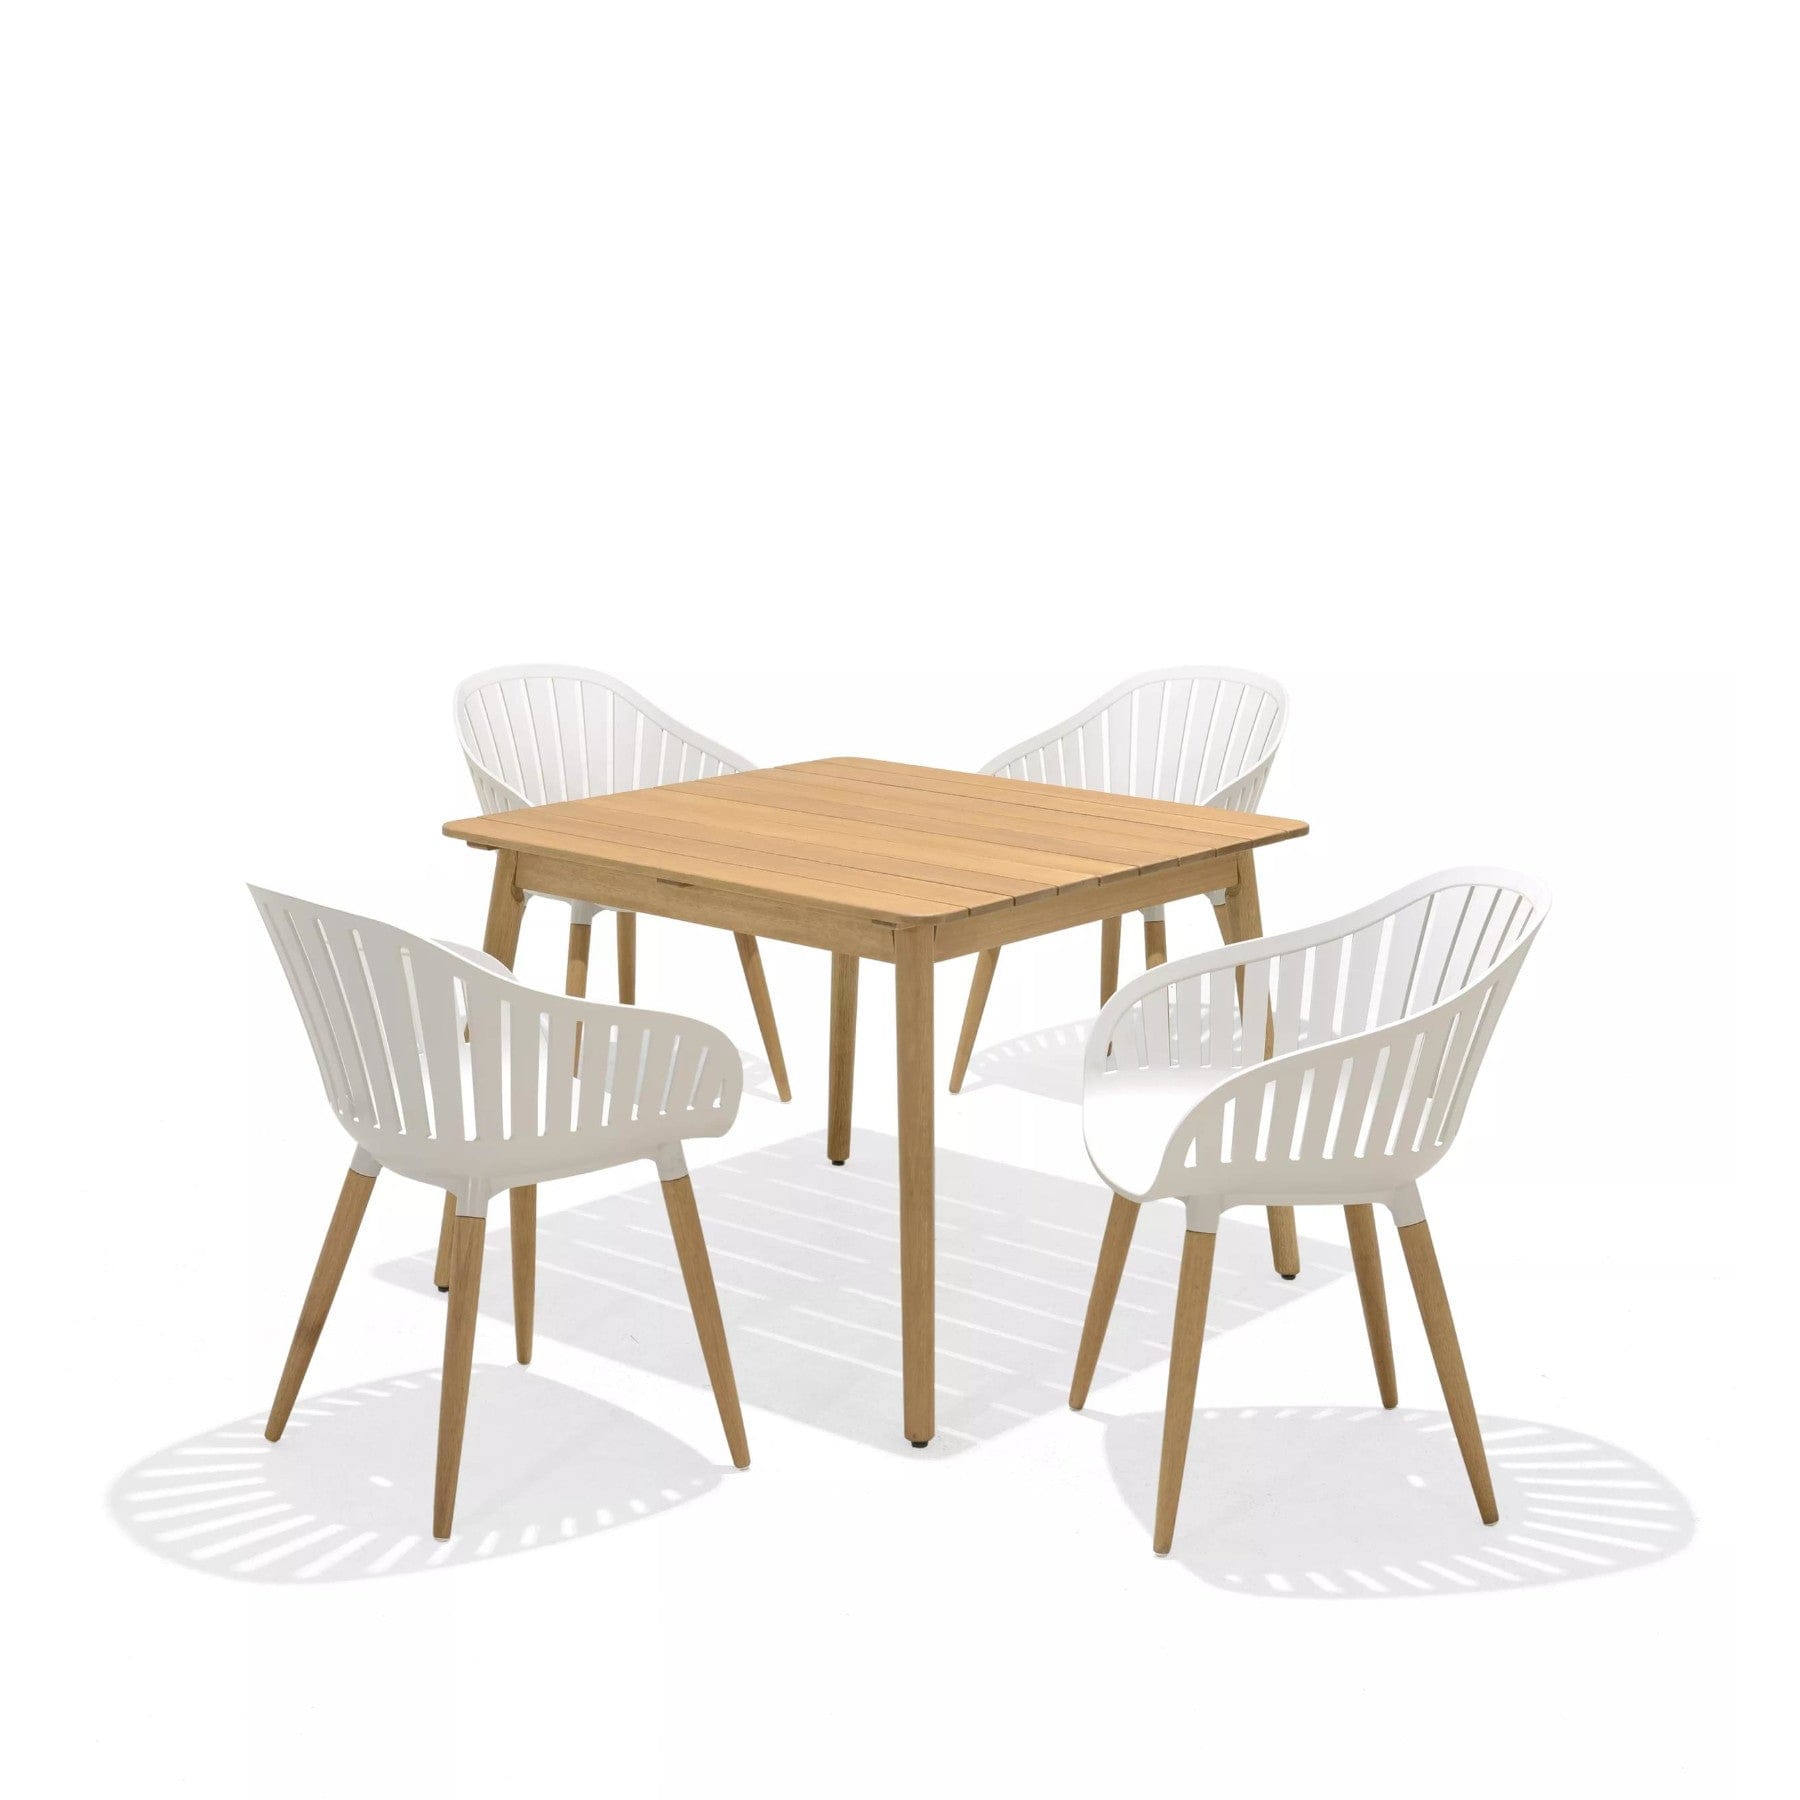 Modern wooden dining table with four white chairs on a white background